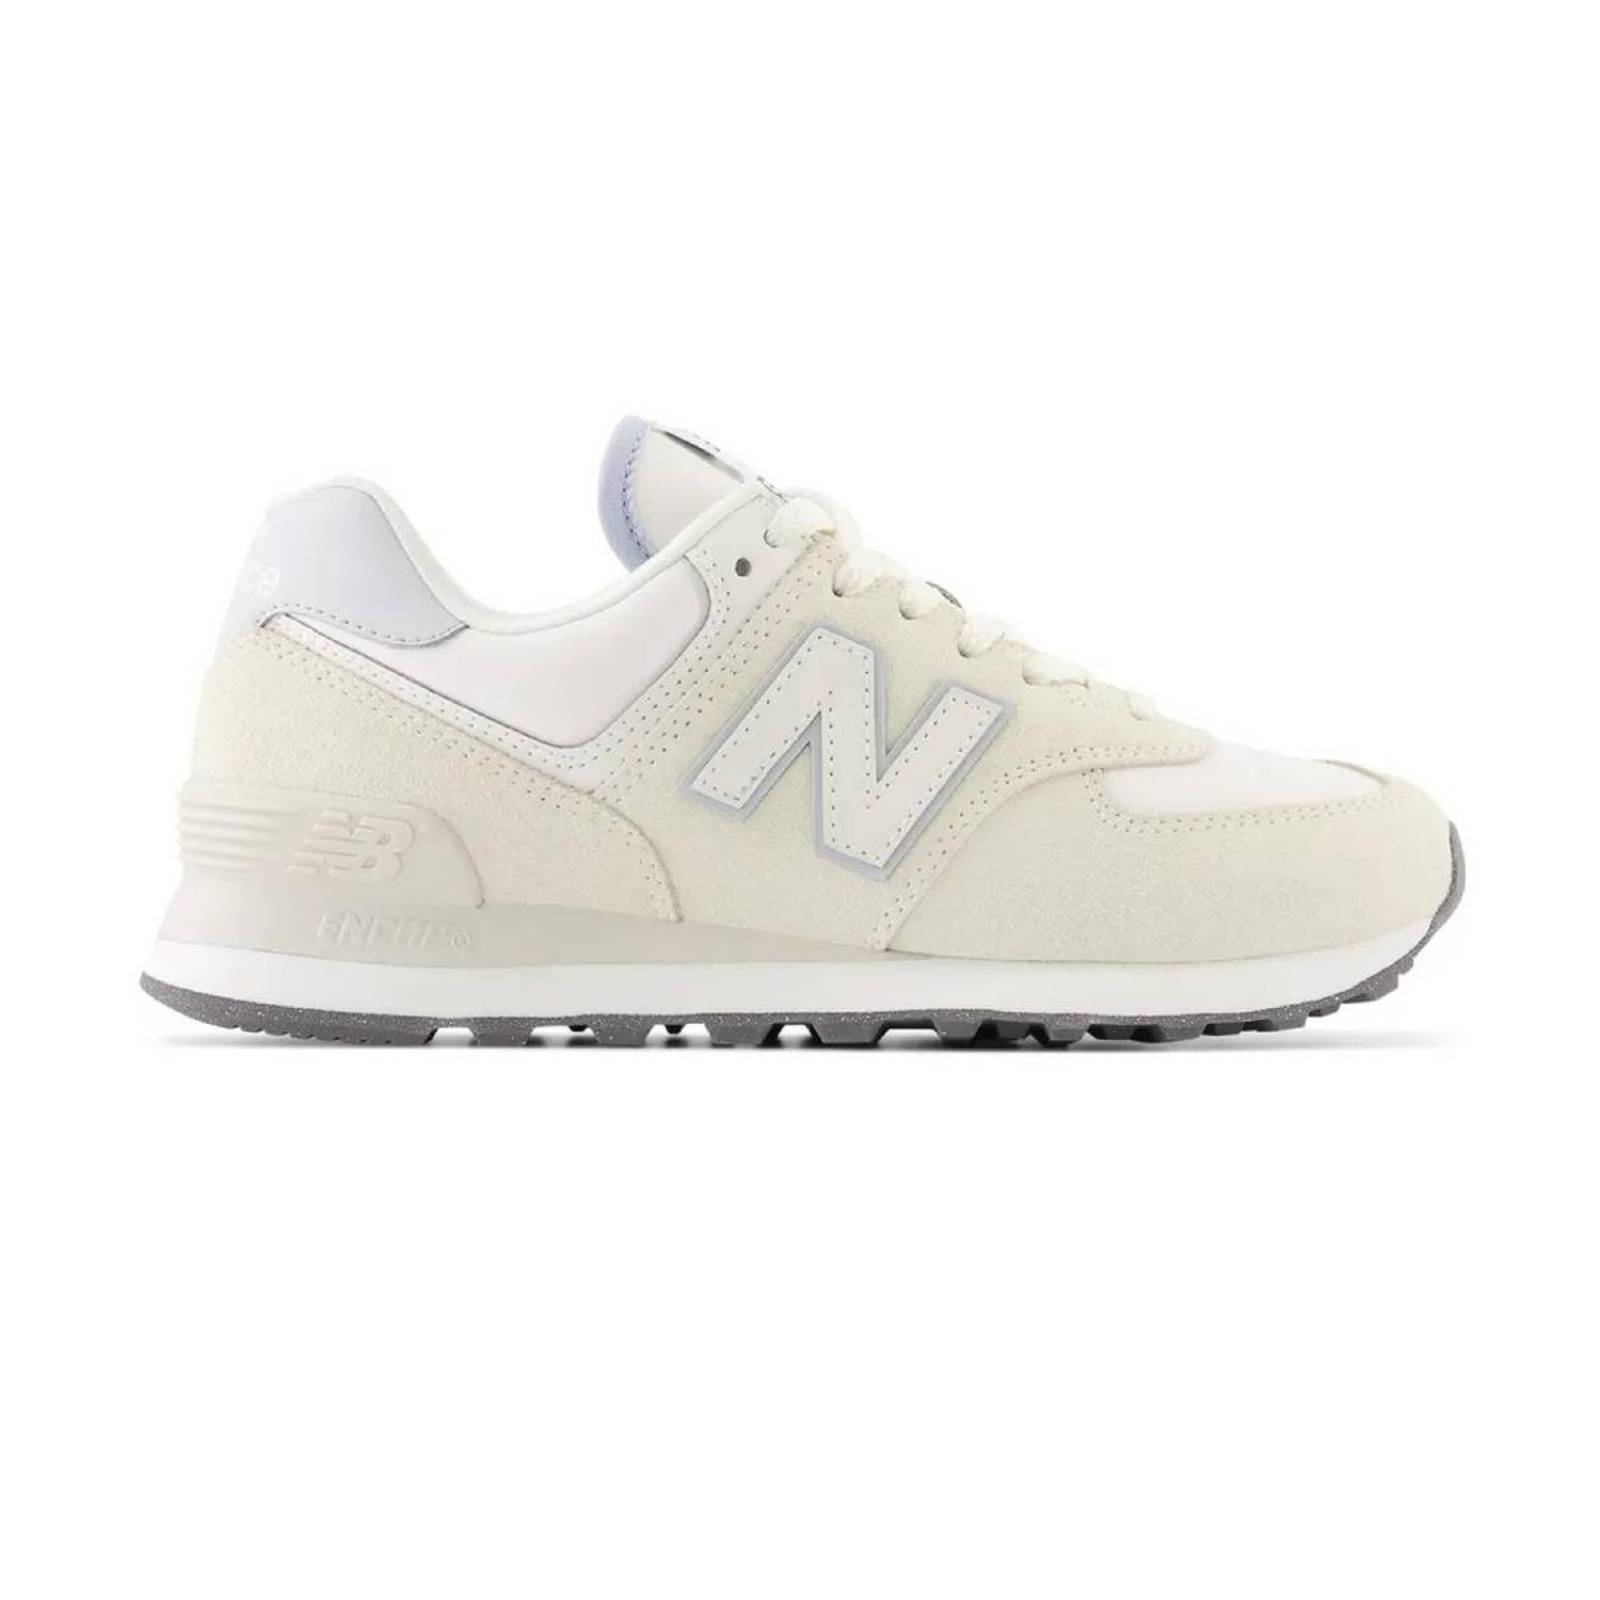 New Balance: Tenis casuales con bloques Mujer